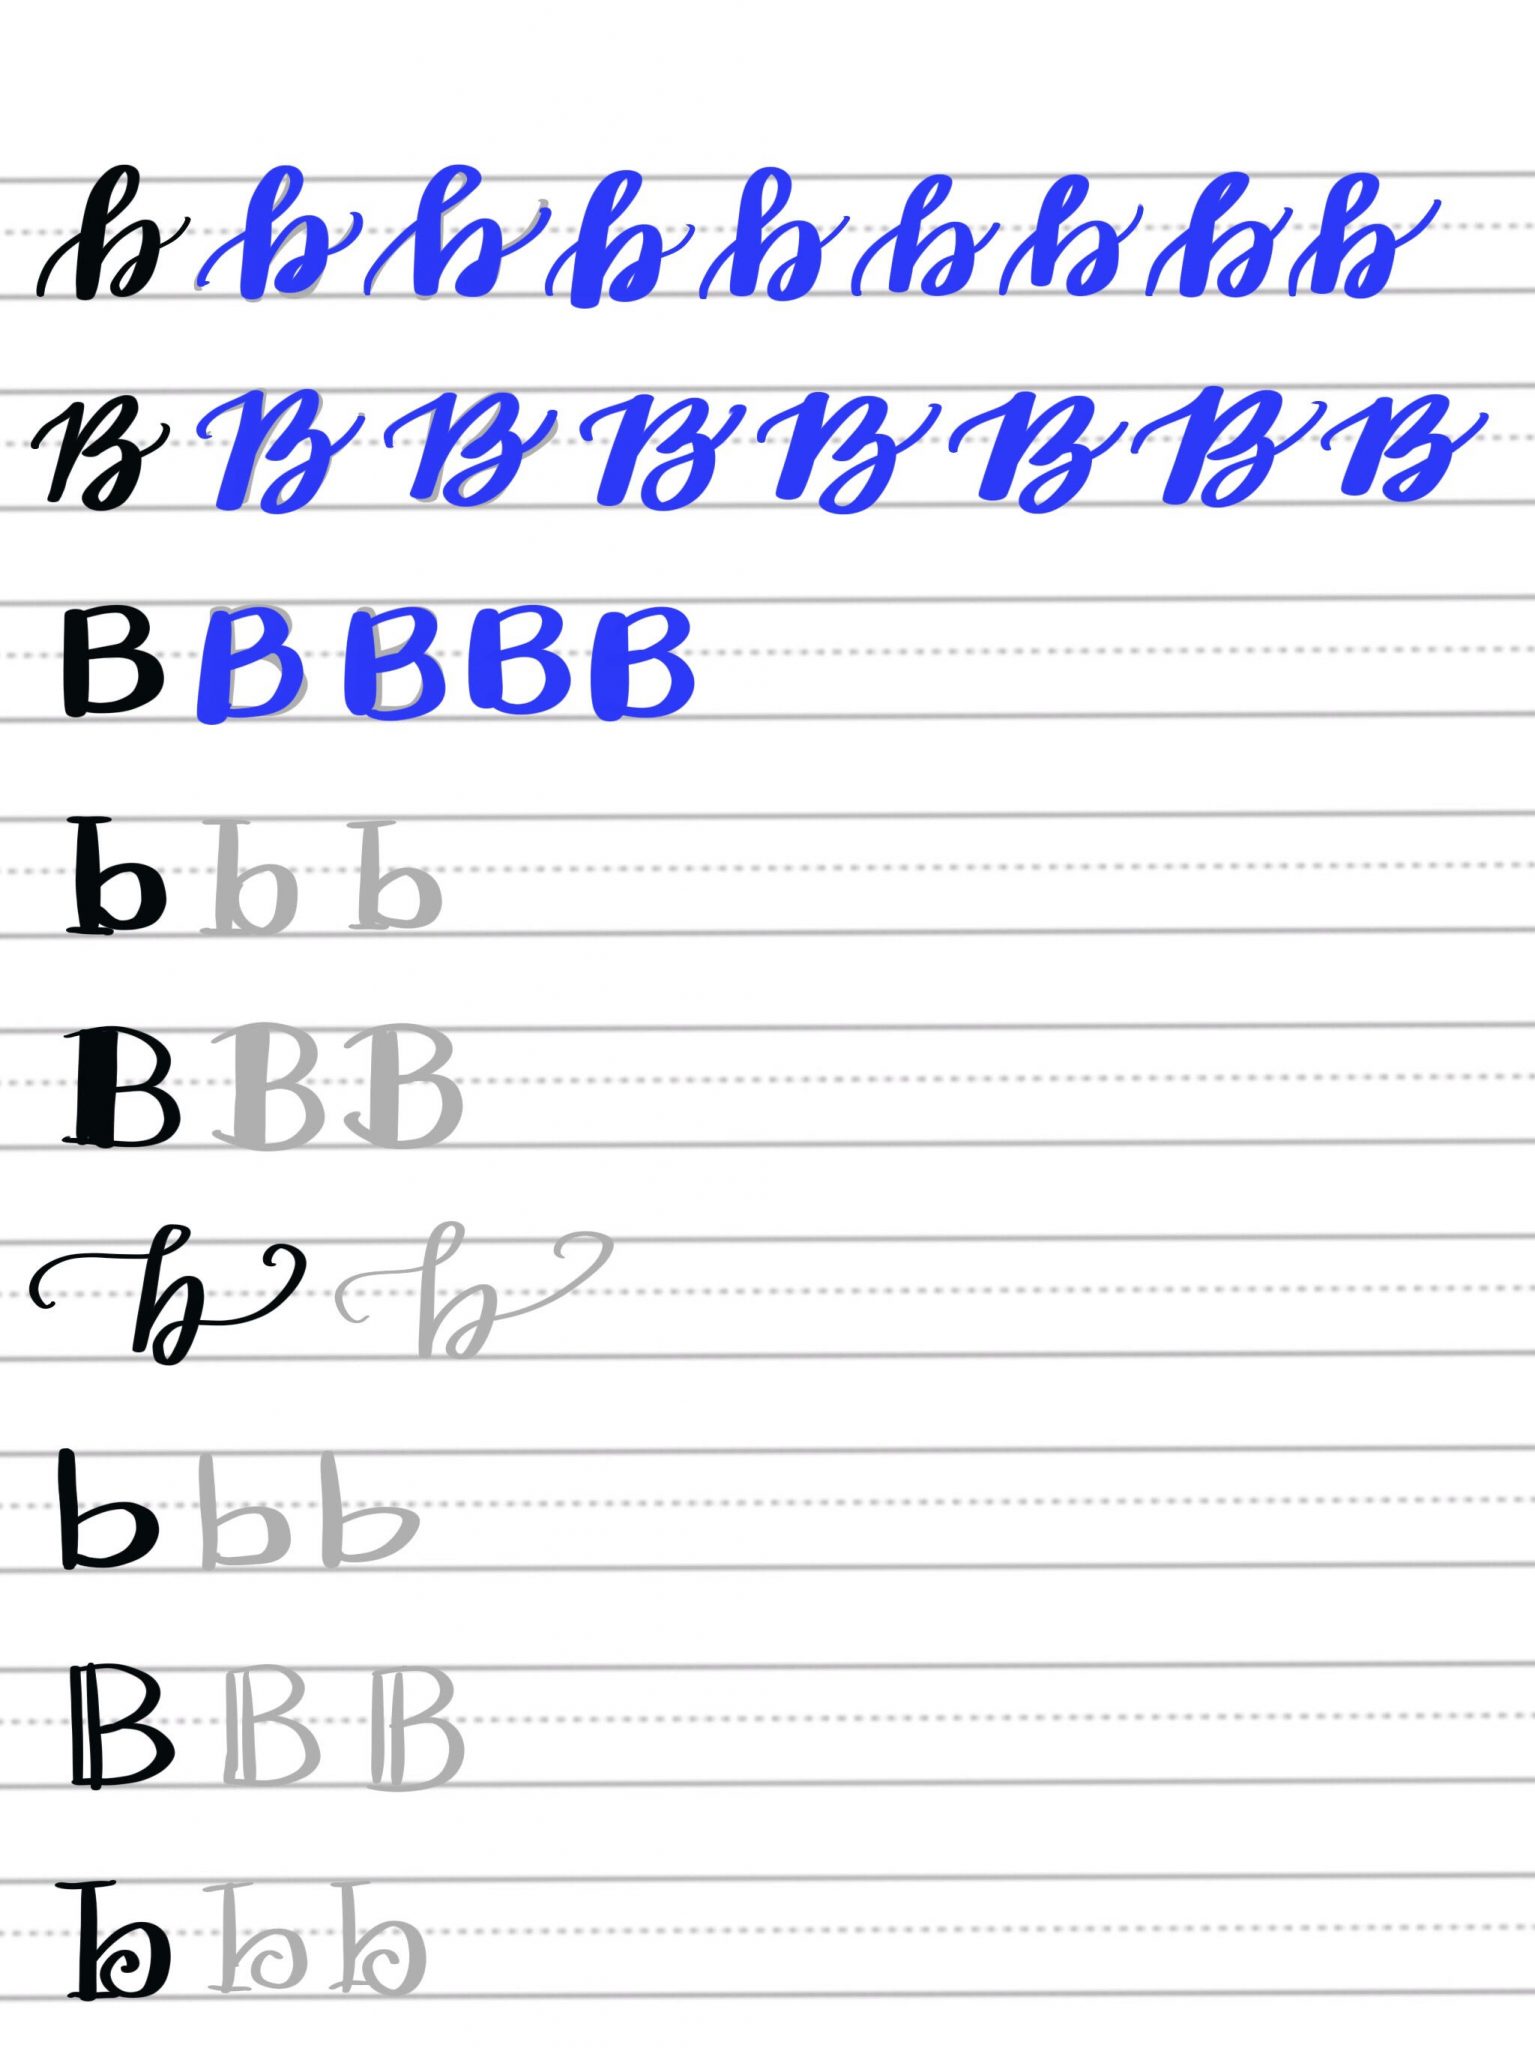 Hand Lettering Practice: 9 Ways to Draw a "B"